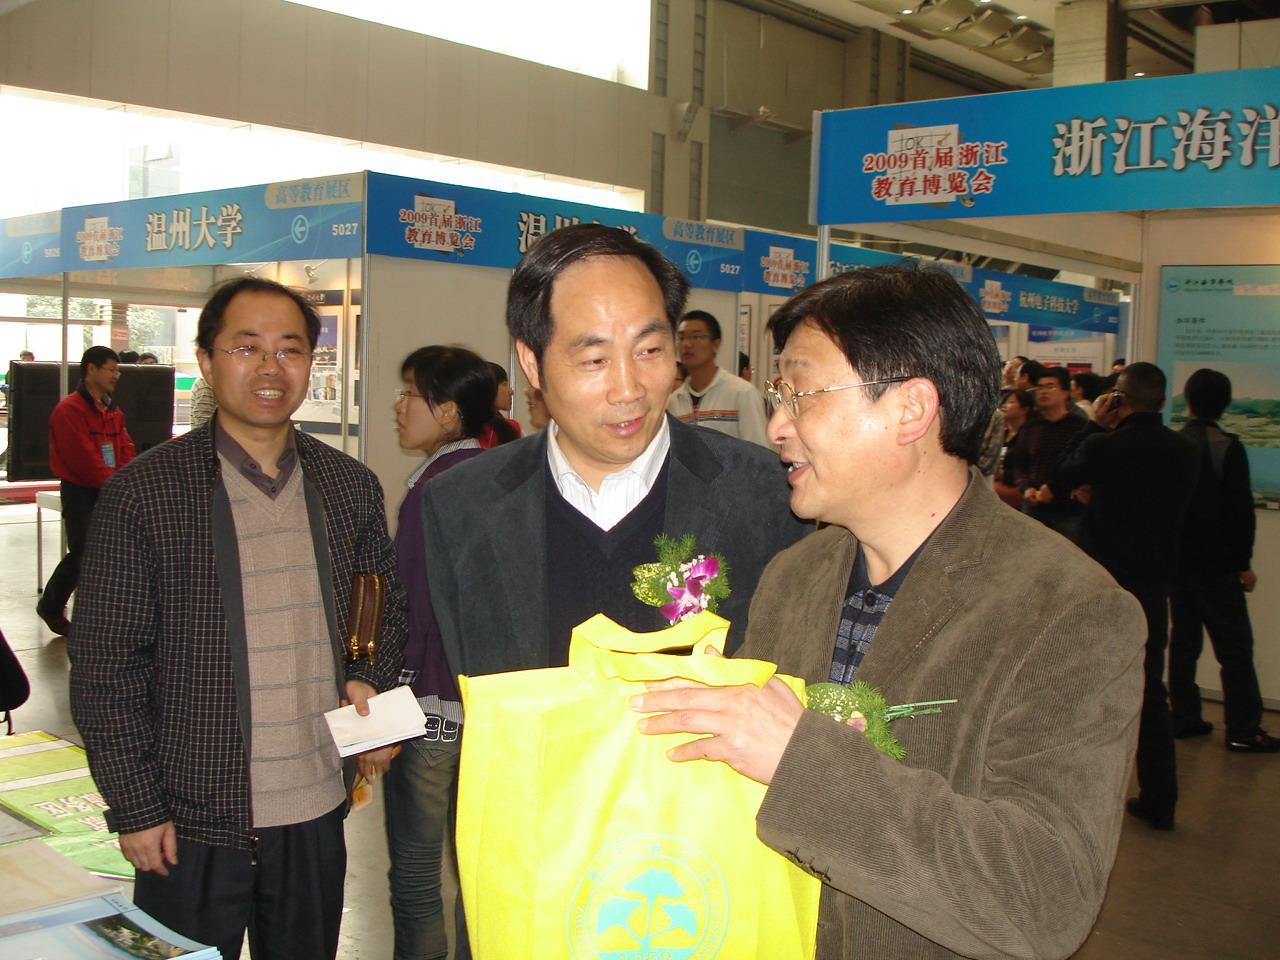 ZFU Took Part at the First Zhejiang Education Expo